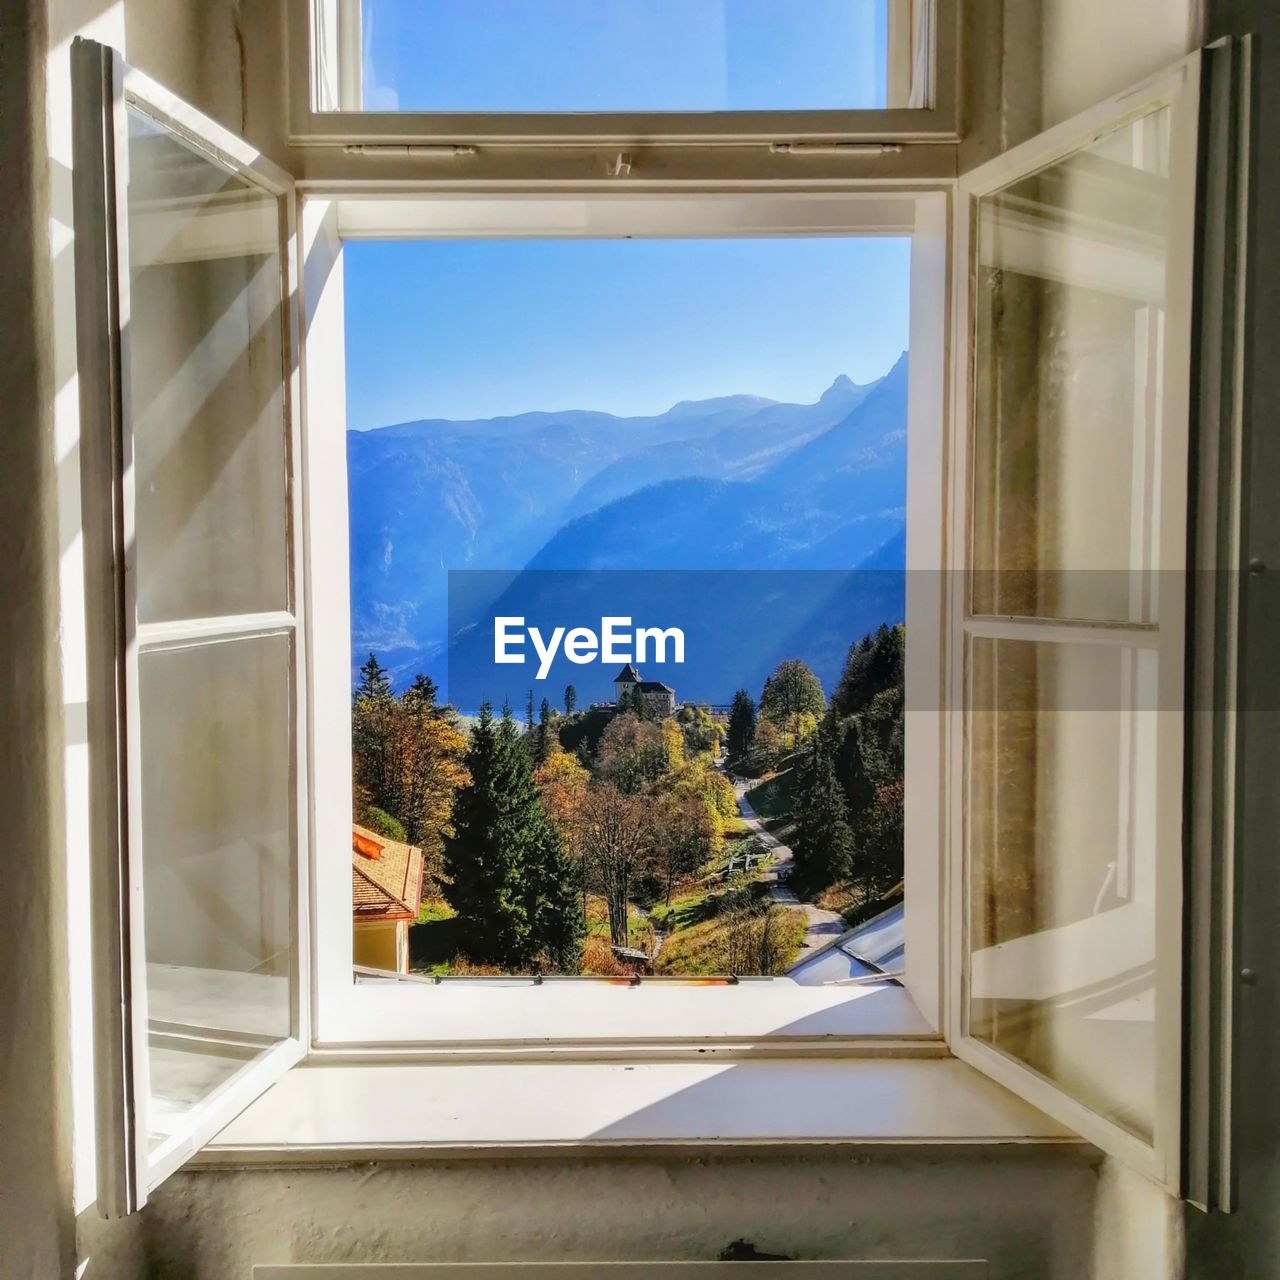 Trees and mountains seen through window